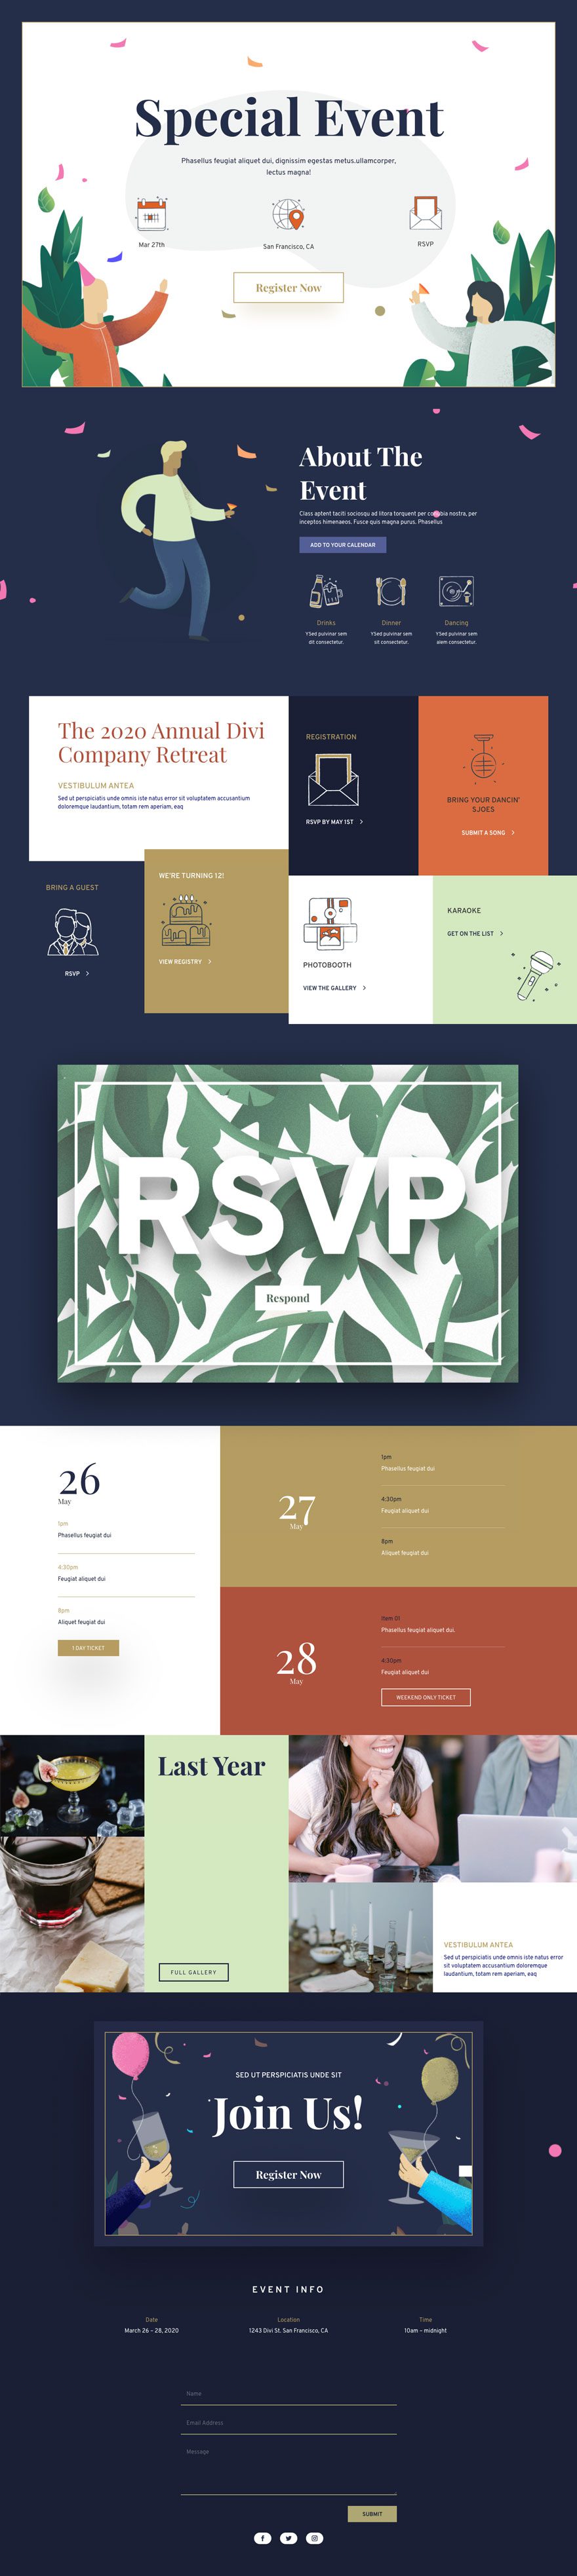 divi event layout pack